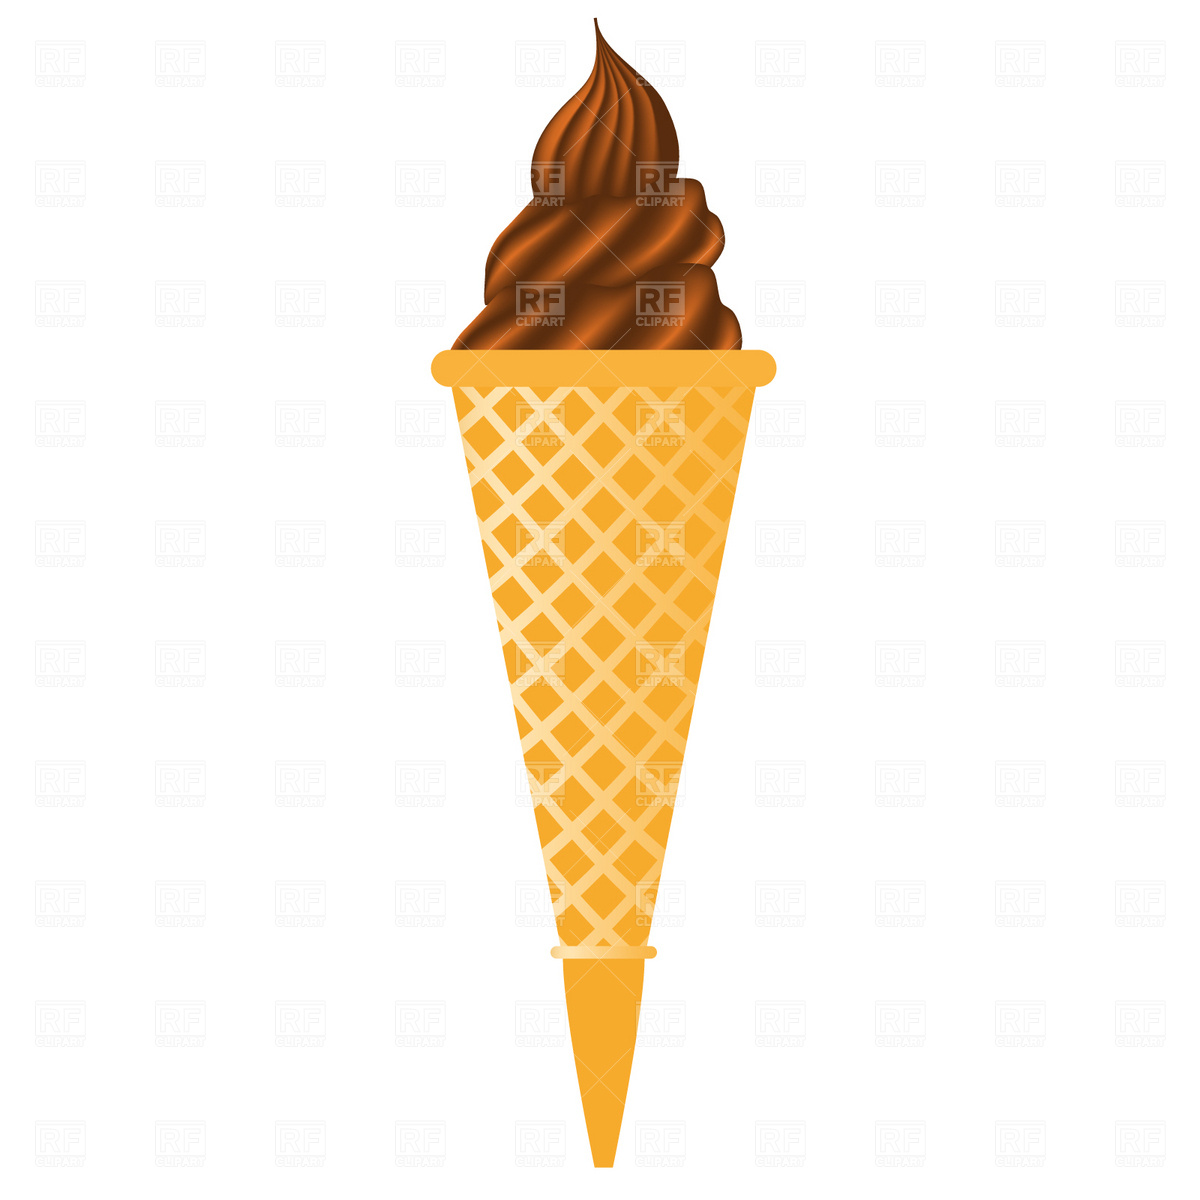 Chocolate Ice Cream Cone Download Royalty Free Vector Clipart  Eps